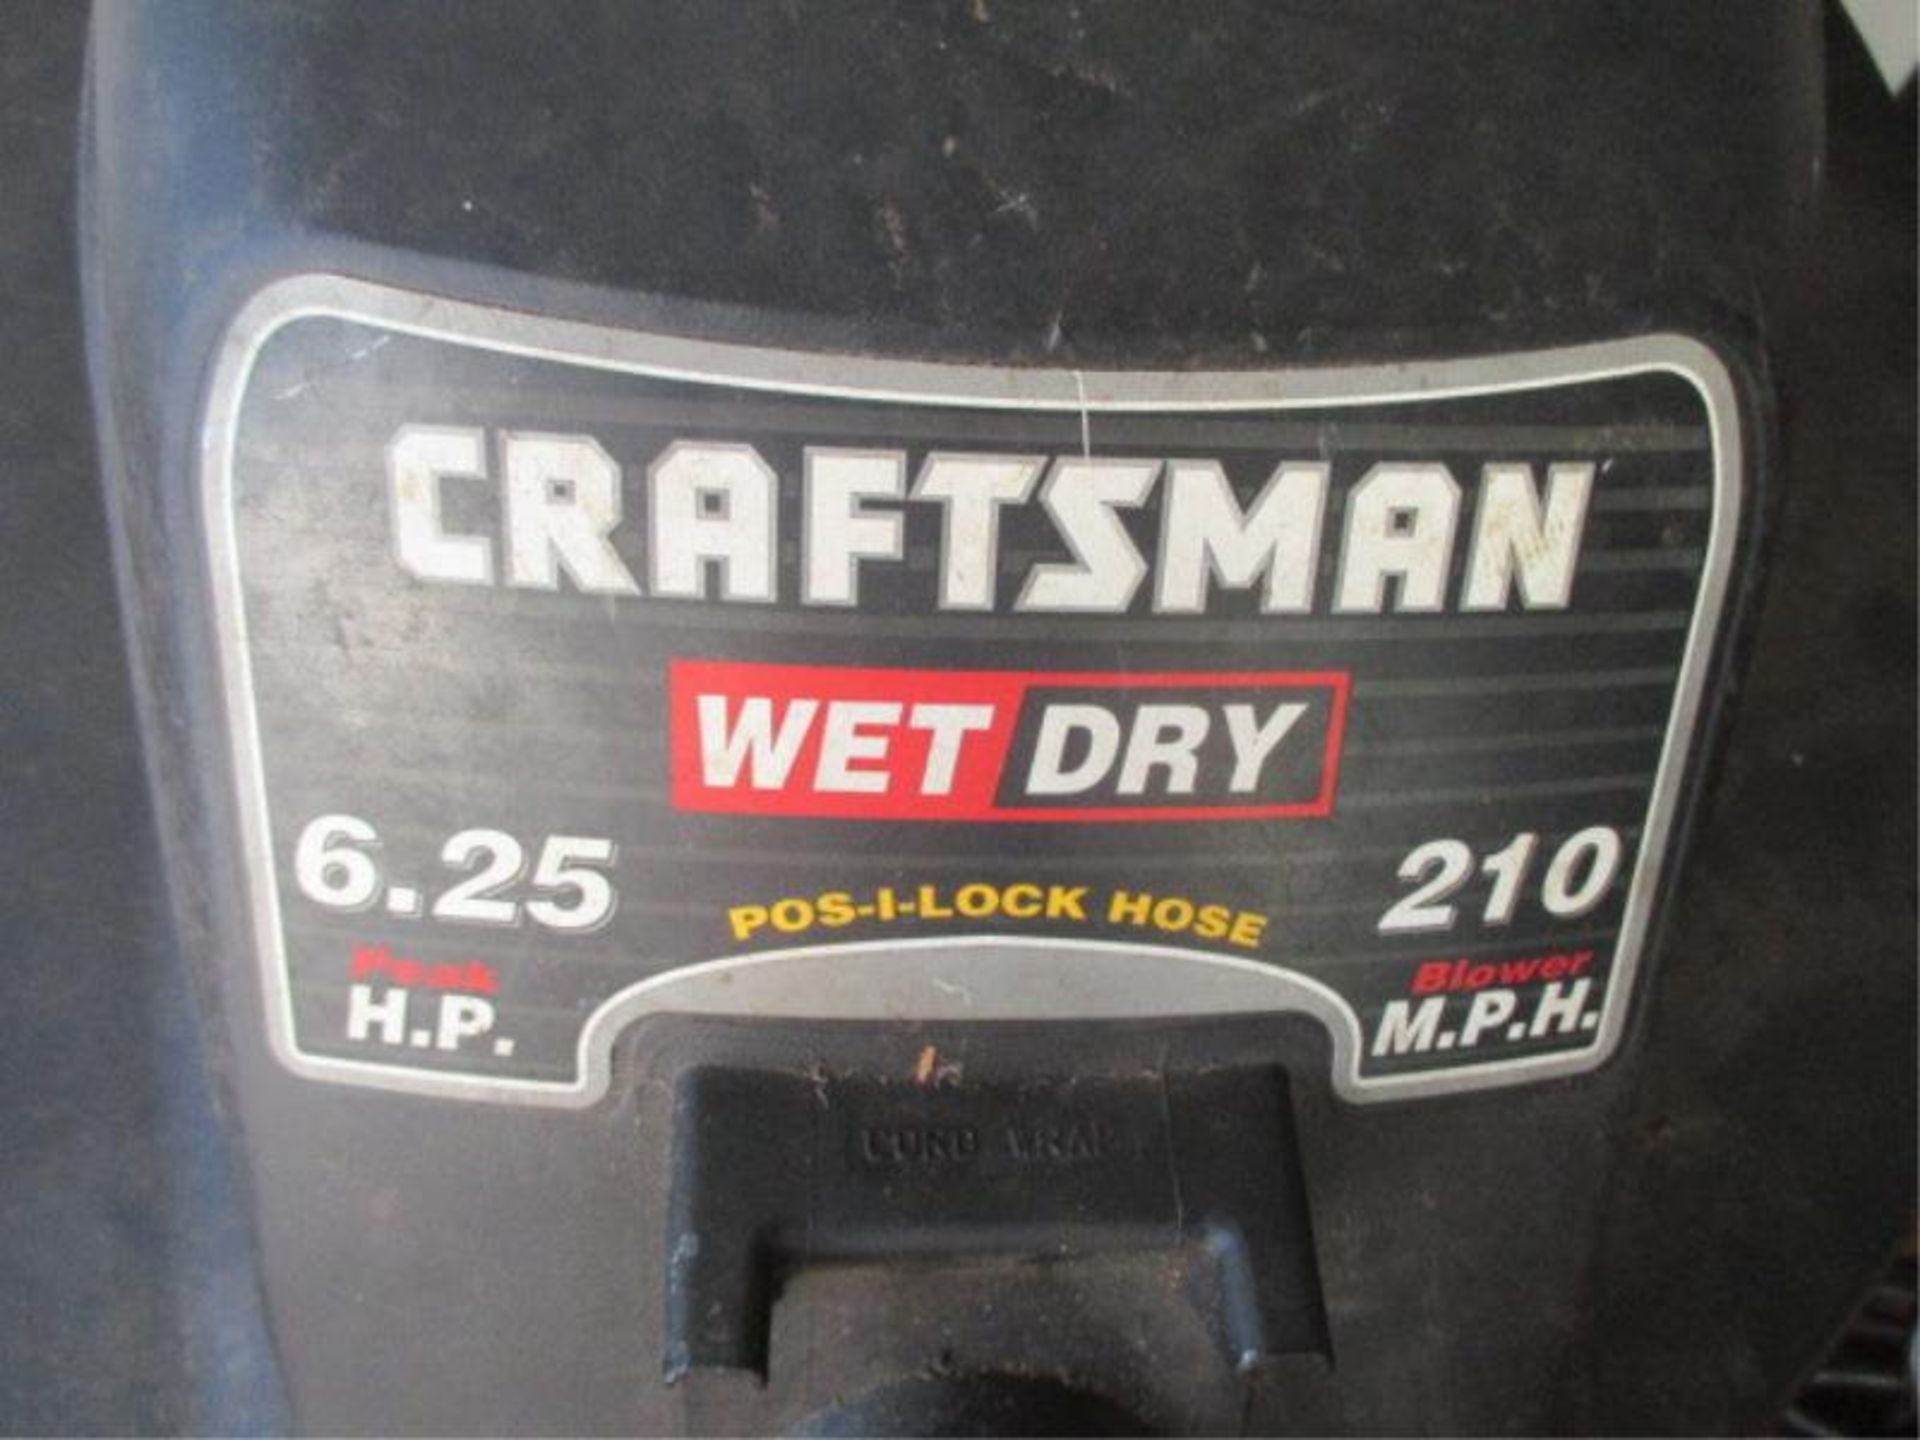 Crafsman Wet / Dry Vac, 16 Gallon, 6.25 Peak HP, 210 Blower MPH, Red 210 Blower MPH, Red - Image 3 of 5